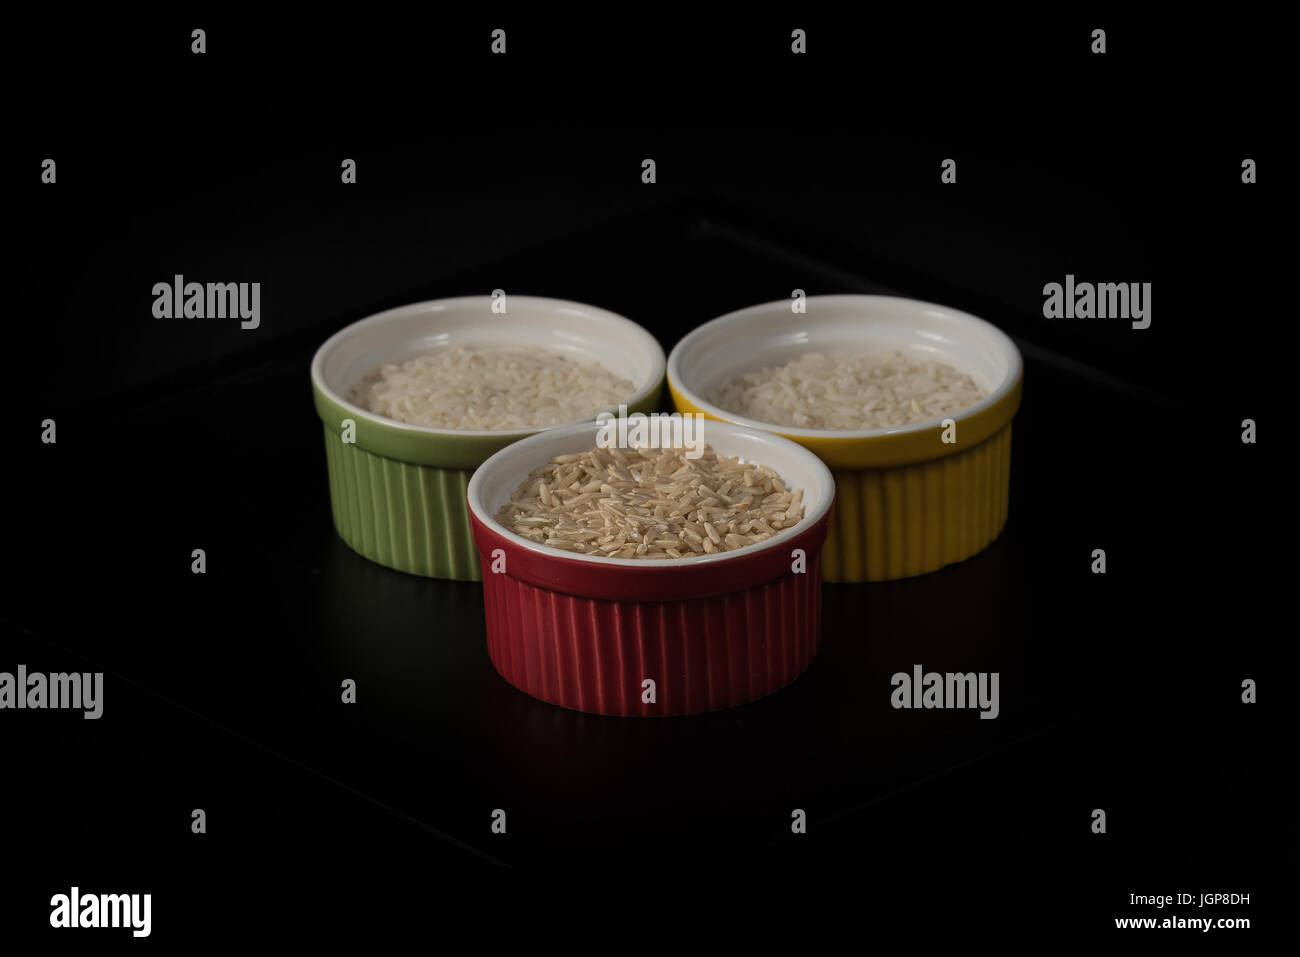 White and brown grains of rice in multicolored ramekins Stock Photo